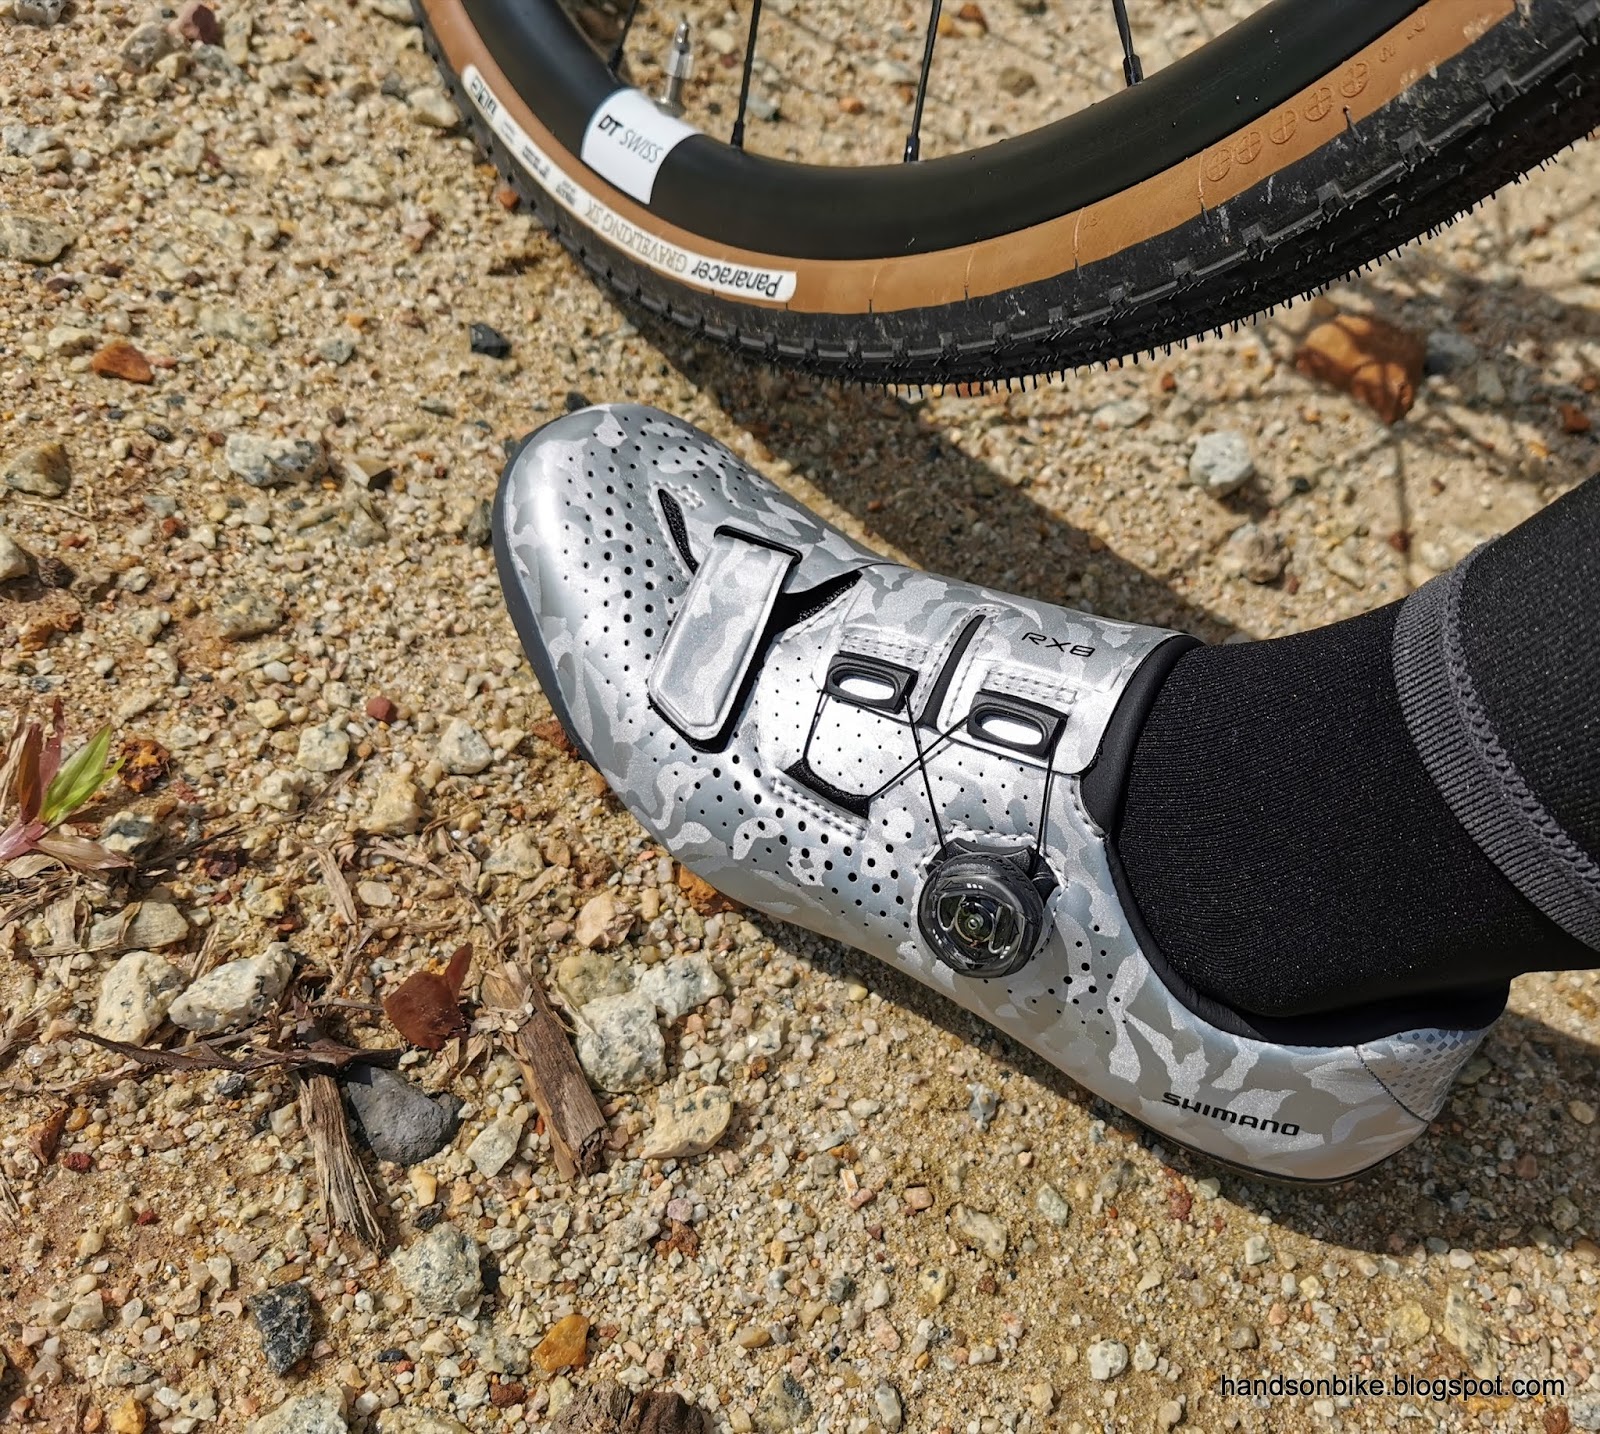 Hands On Bike: Shimano RX8 Gravel Shoes - Silver Camo